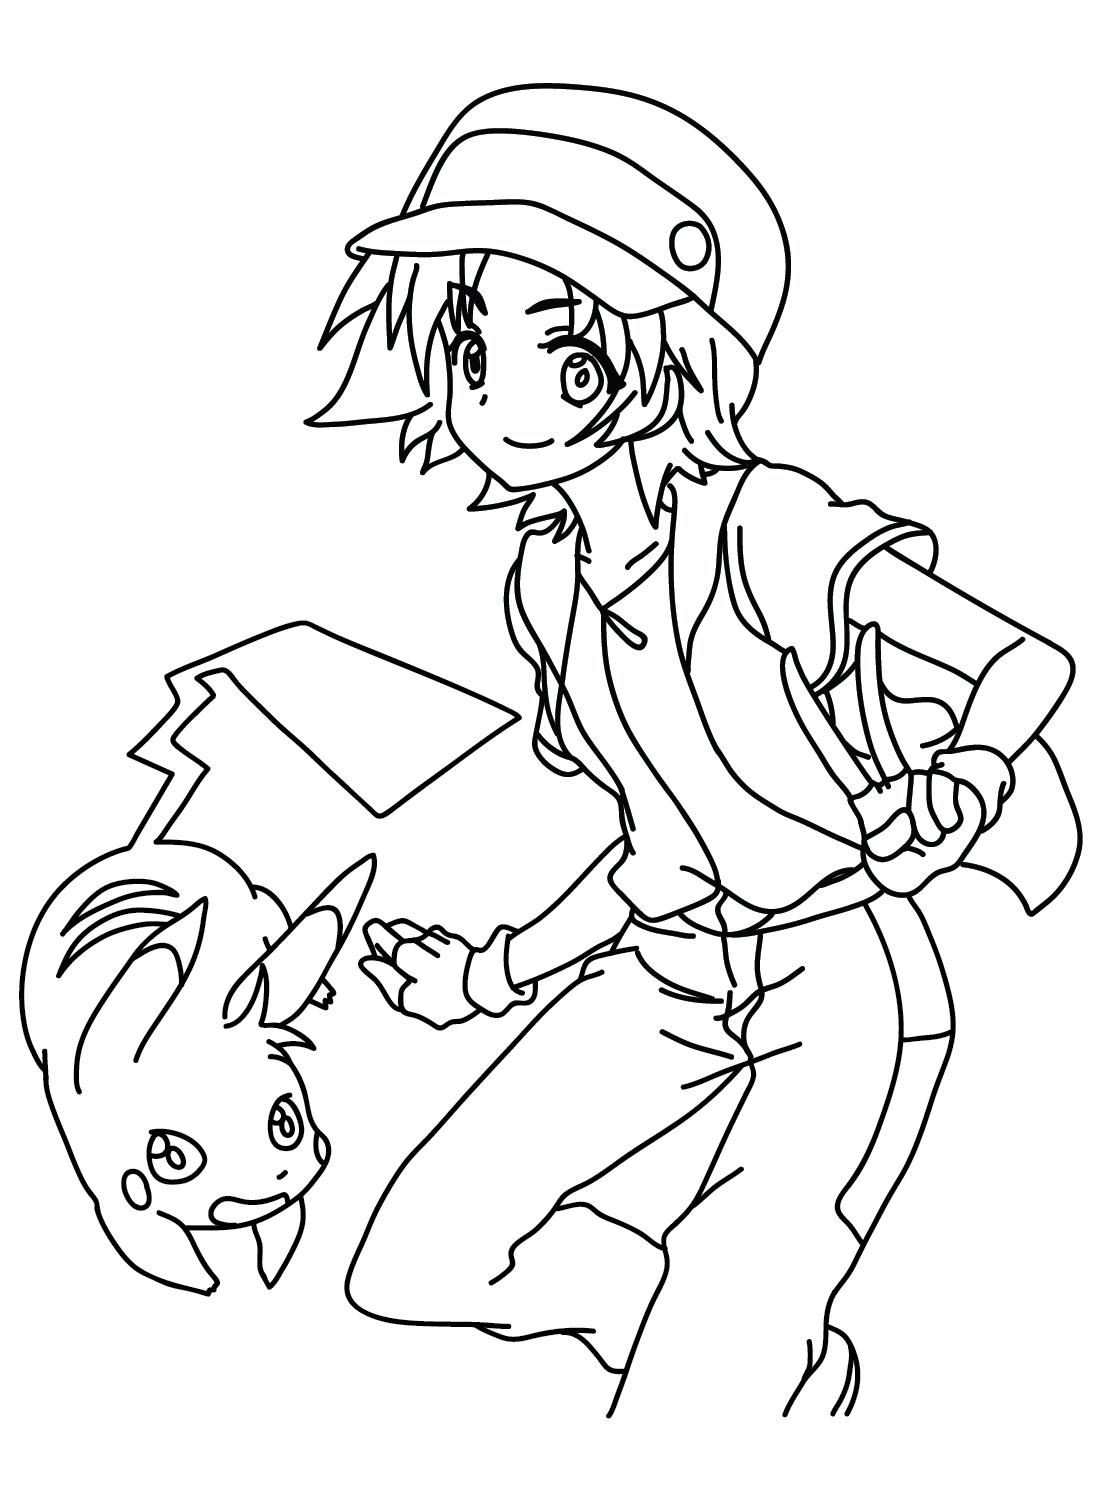 Ritchie Pokemon Coloring Page Images